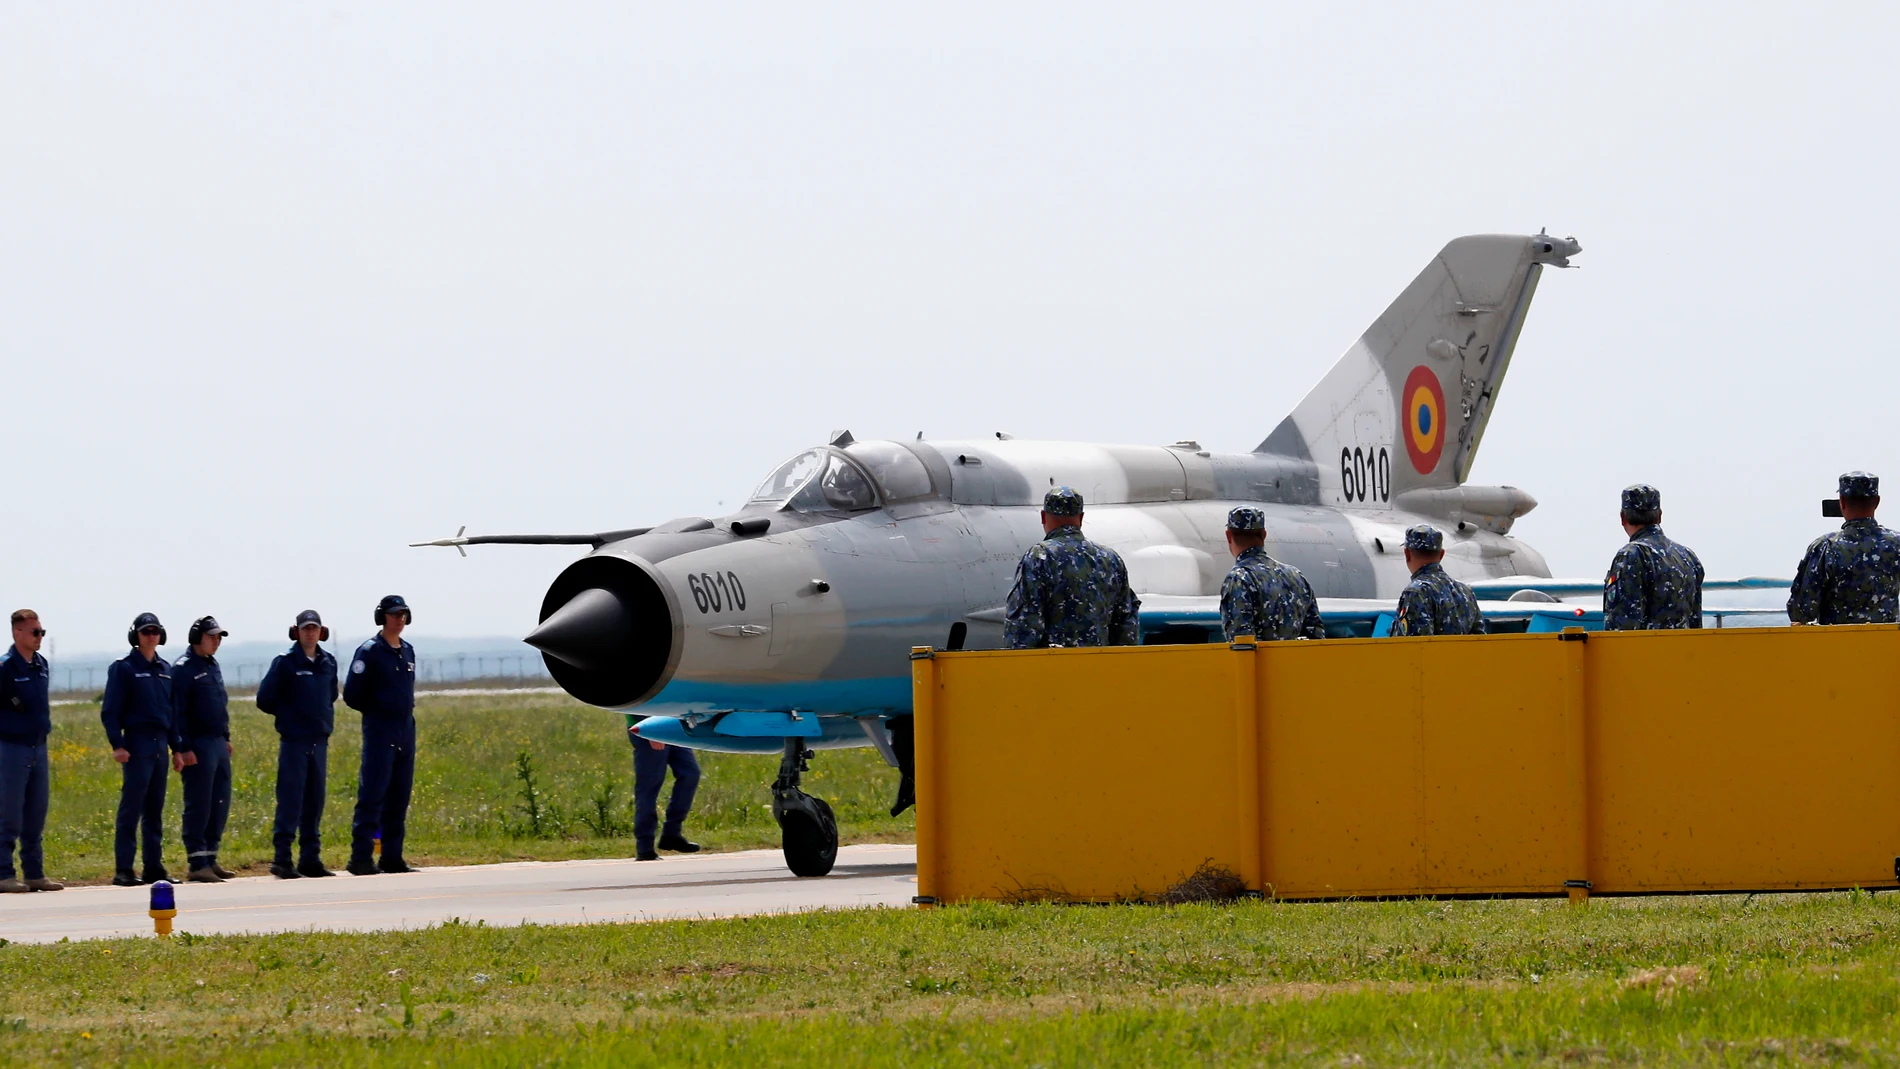 Borcea (Romania), 15/05/2023.- A Romanian Air Force MiG-21 LanceR is watched by a ground crew as it taxis to its last take-off during a decommissioning ceremony on the 86th Air Base, in Borcea, 156 kilometers south-east from Bucharest, Romania, 15 May 2023. The ceremony at the 'Lieutenant Aviator Gheorghe Mociornita' Air Base was completed with a last flight of the Mig21 LanceR warplanes of Soviet production after which they will be taken out of service based on a decision of the Romanian Supreme Council of Defense. Romania opted for F16 aircrafts with which the Romanian Air Force will continue to perform the permanent Air Police Combat Service within the mission of the Reinforced Air Police under NATO command. Romania has firmed up plans to acquire the Lockheed Martin F-35 Lightning II Joint Strike Fighter, the Romanian Ministry of Defence being expected to submit a formal letter of request to the US government before the end of 2024. The Mikoyan-Gurevich MiG-21 (NATO name: Fishbed) is a supersonic jet fighter and interceptor aircraft, designed in the former Soviet Union and entered service in 1959. Romanian Air Forces modernized its MIG-21 fleet by using the services of Israeli company ELBIT for its upgraded version MIG-21 LanceR. The jet was the most-produced supersonic jet aircraft in aviation history, the most-produced combat aircraft since the Korean War and the longest production run of any combat aircraft (apart from US jet fighters F15 and F16). From 1994 to 2023, the Air Force has lost approximately 20 MiG21s in accidents. Romania needs 48 aircraft to carry out its air police missions alone and to fulfill the combat requirements, according to Romania's commitments upon joining NATO. (Rumanía, Bucarest) EFE/EPA/ROBERT GHEMENT 